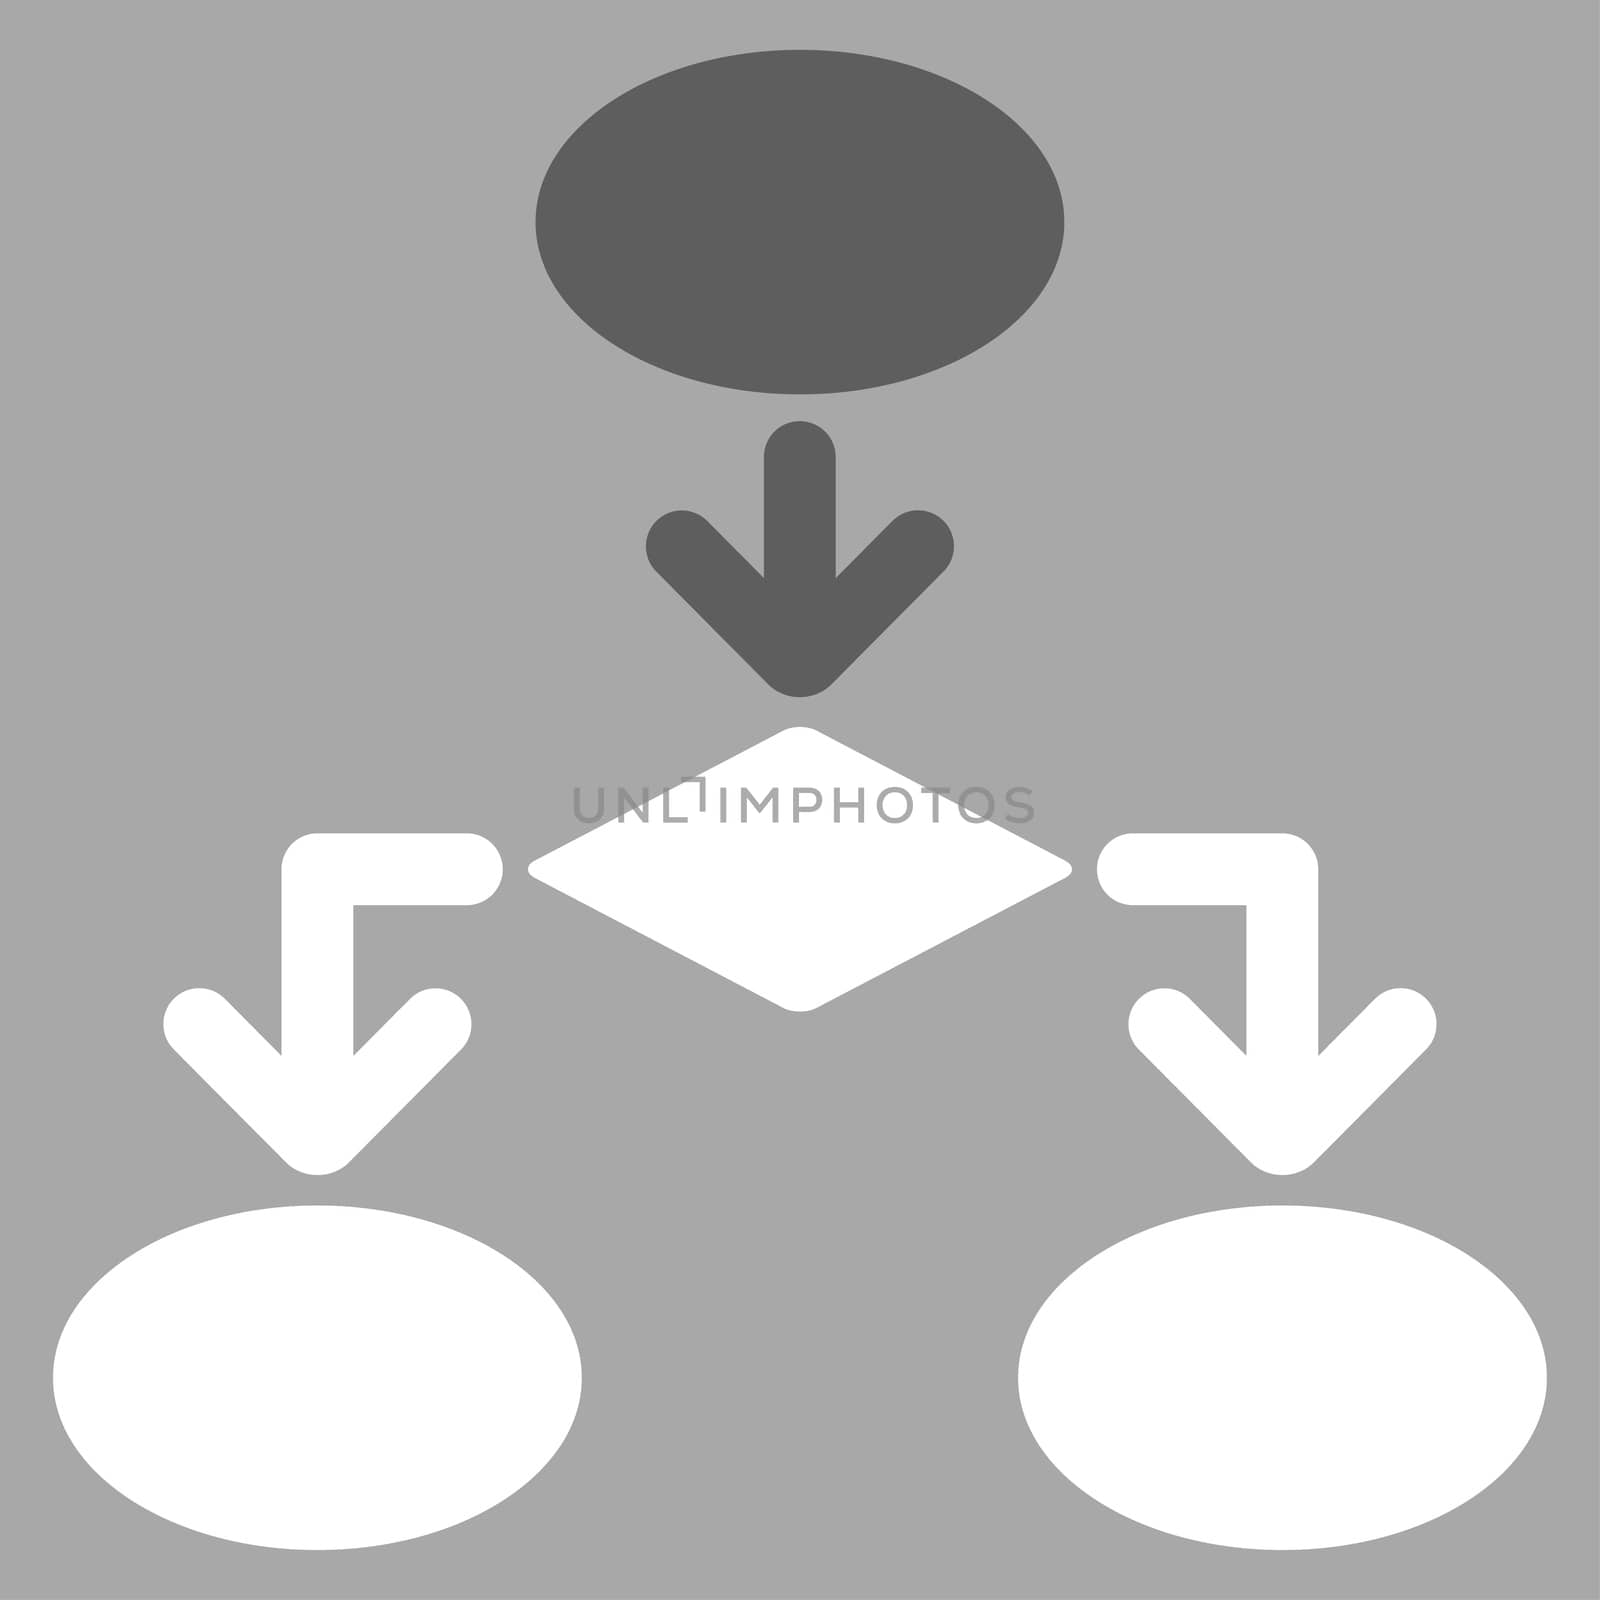 Flowchart icon from Commerce Set. Glyph style: bicolor flat symbol, dark gray and white colors, rounded angles, silver background.